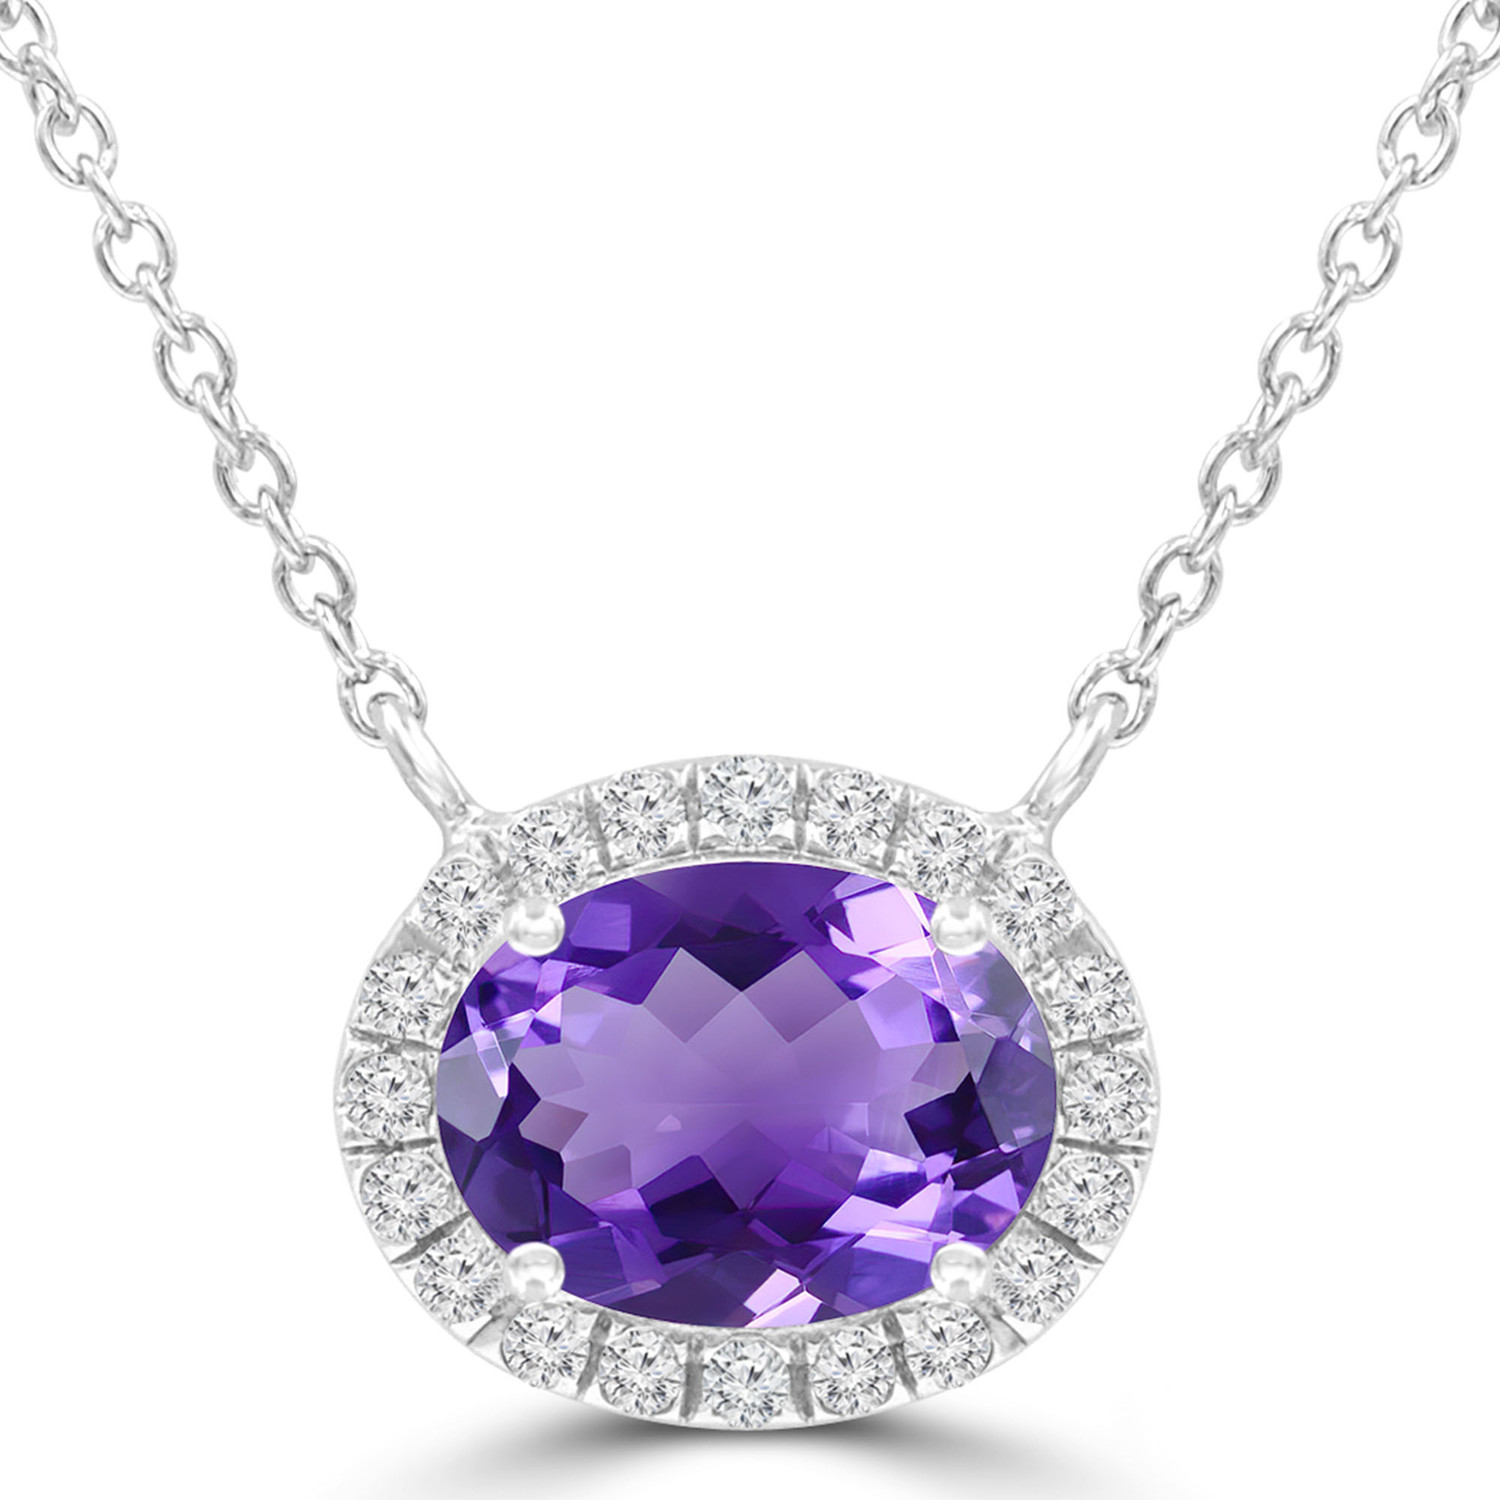 1 1/4 CTW Oval Purple Amethyst Oval Halo  Necklace in 14K White Gold With Diamond Accent on Chain (MDR220119)